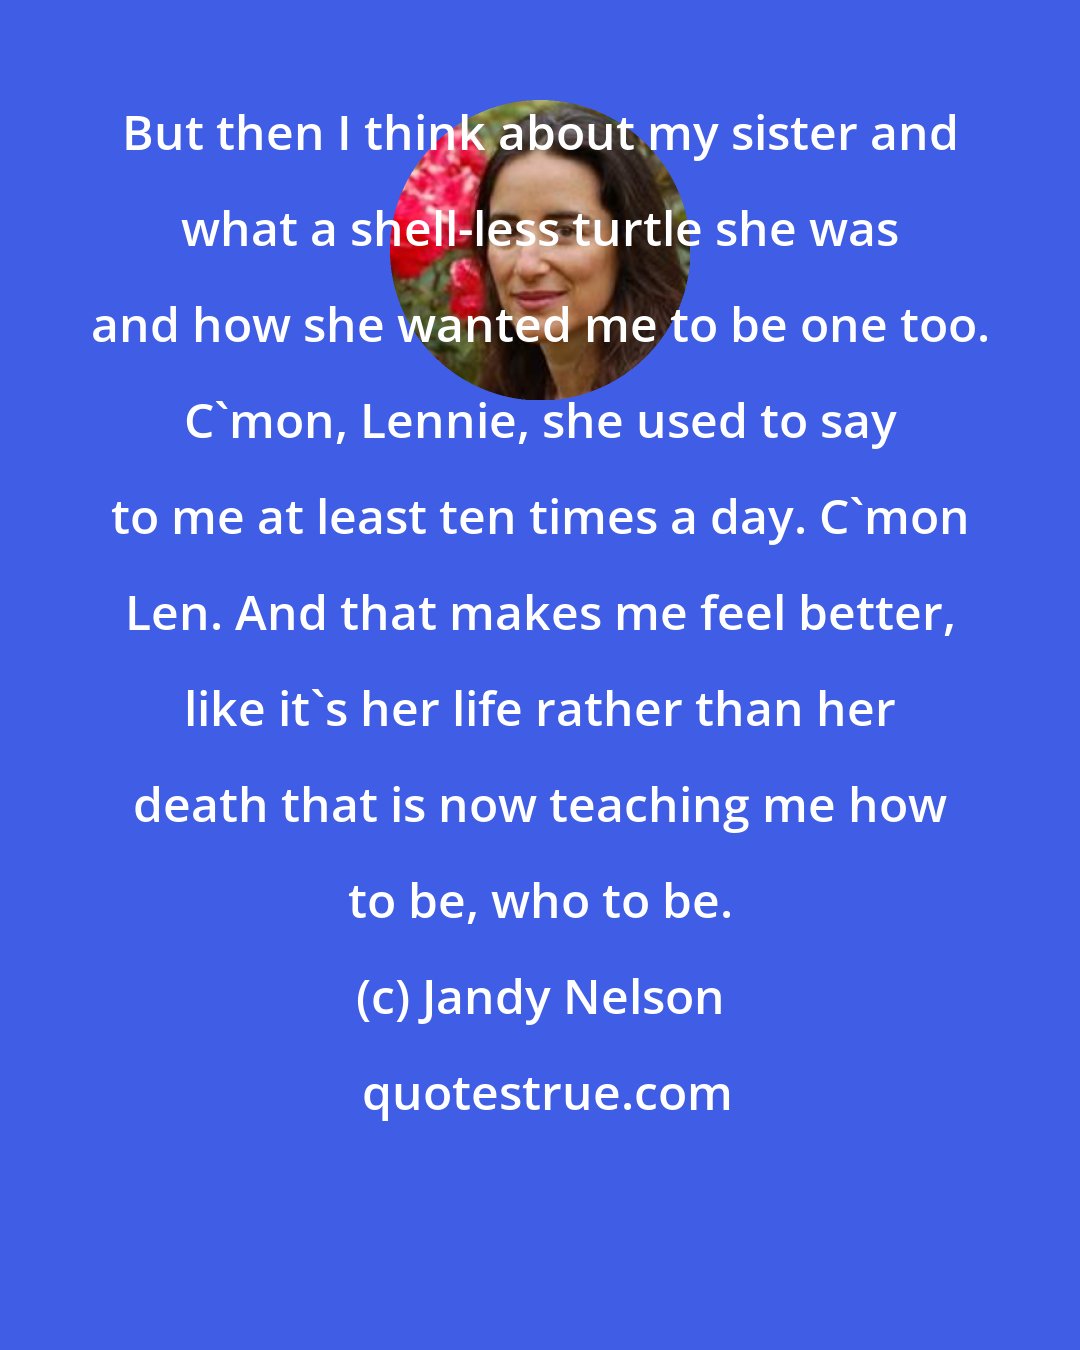 Jandy Nelson: But then I think about my sister and what a shell-less turtle she was and how she wanted me to be one too. C'mon, Lennie, she used to say to me at least ten times a day. C'mon Len. And that makes me feel better, like it's her life rather than her death that is now teaching me how to be, who to be.